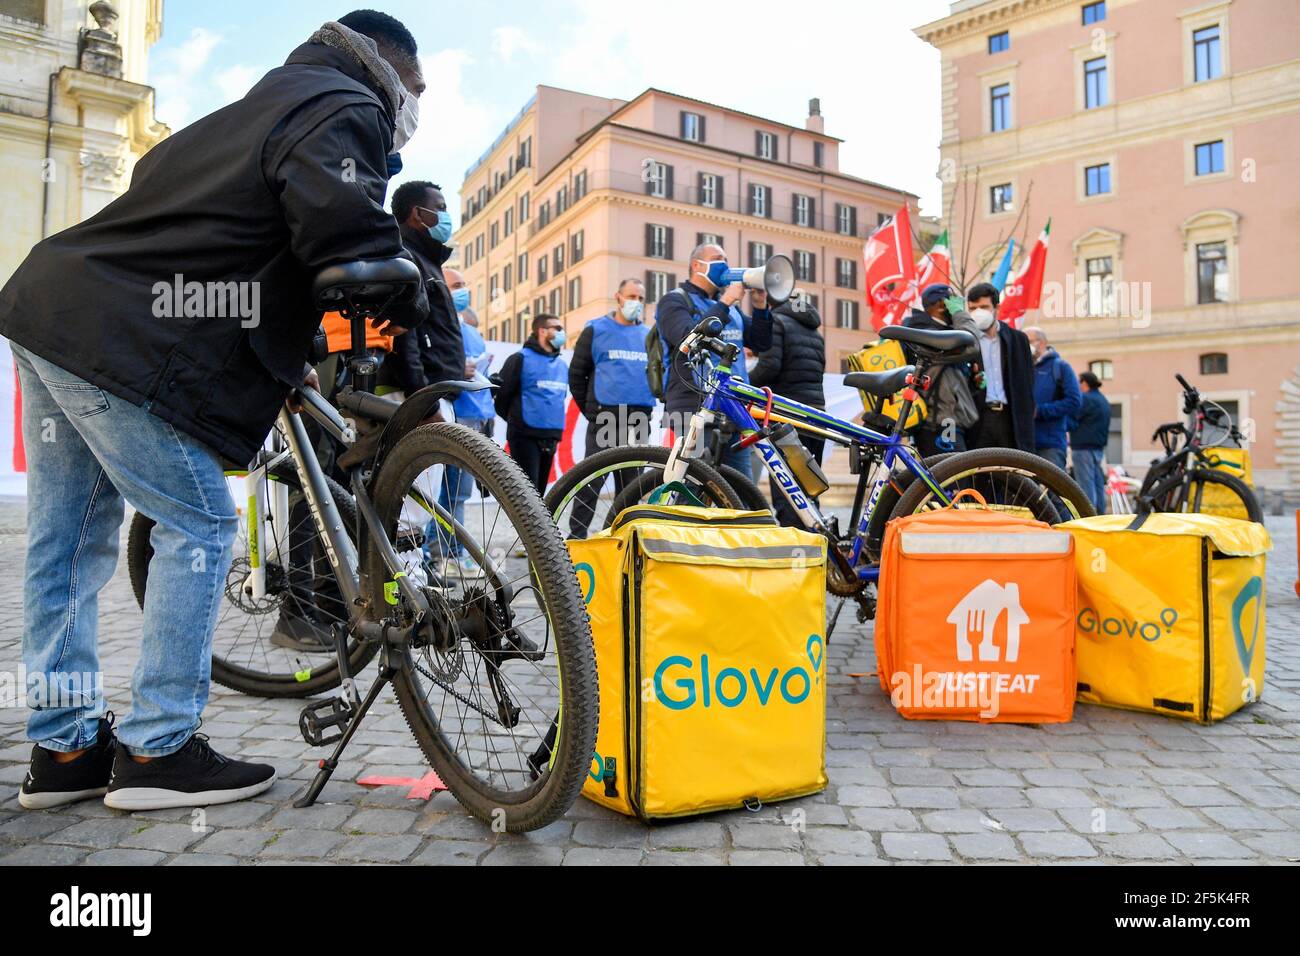 Delivery men from different companies seen during the demonstration.Delivery riders protest in a ‘No delivery day Rider demonstration’ at Piazza San Silvestro Rome asking for real contracts with better protection, concrete guarantees, fairness and respect for their work with adequate remuneration. Stock Photo